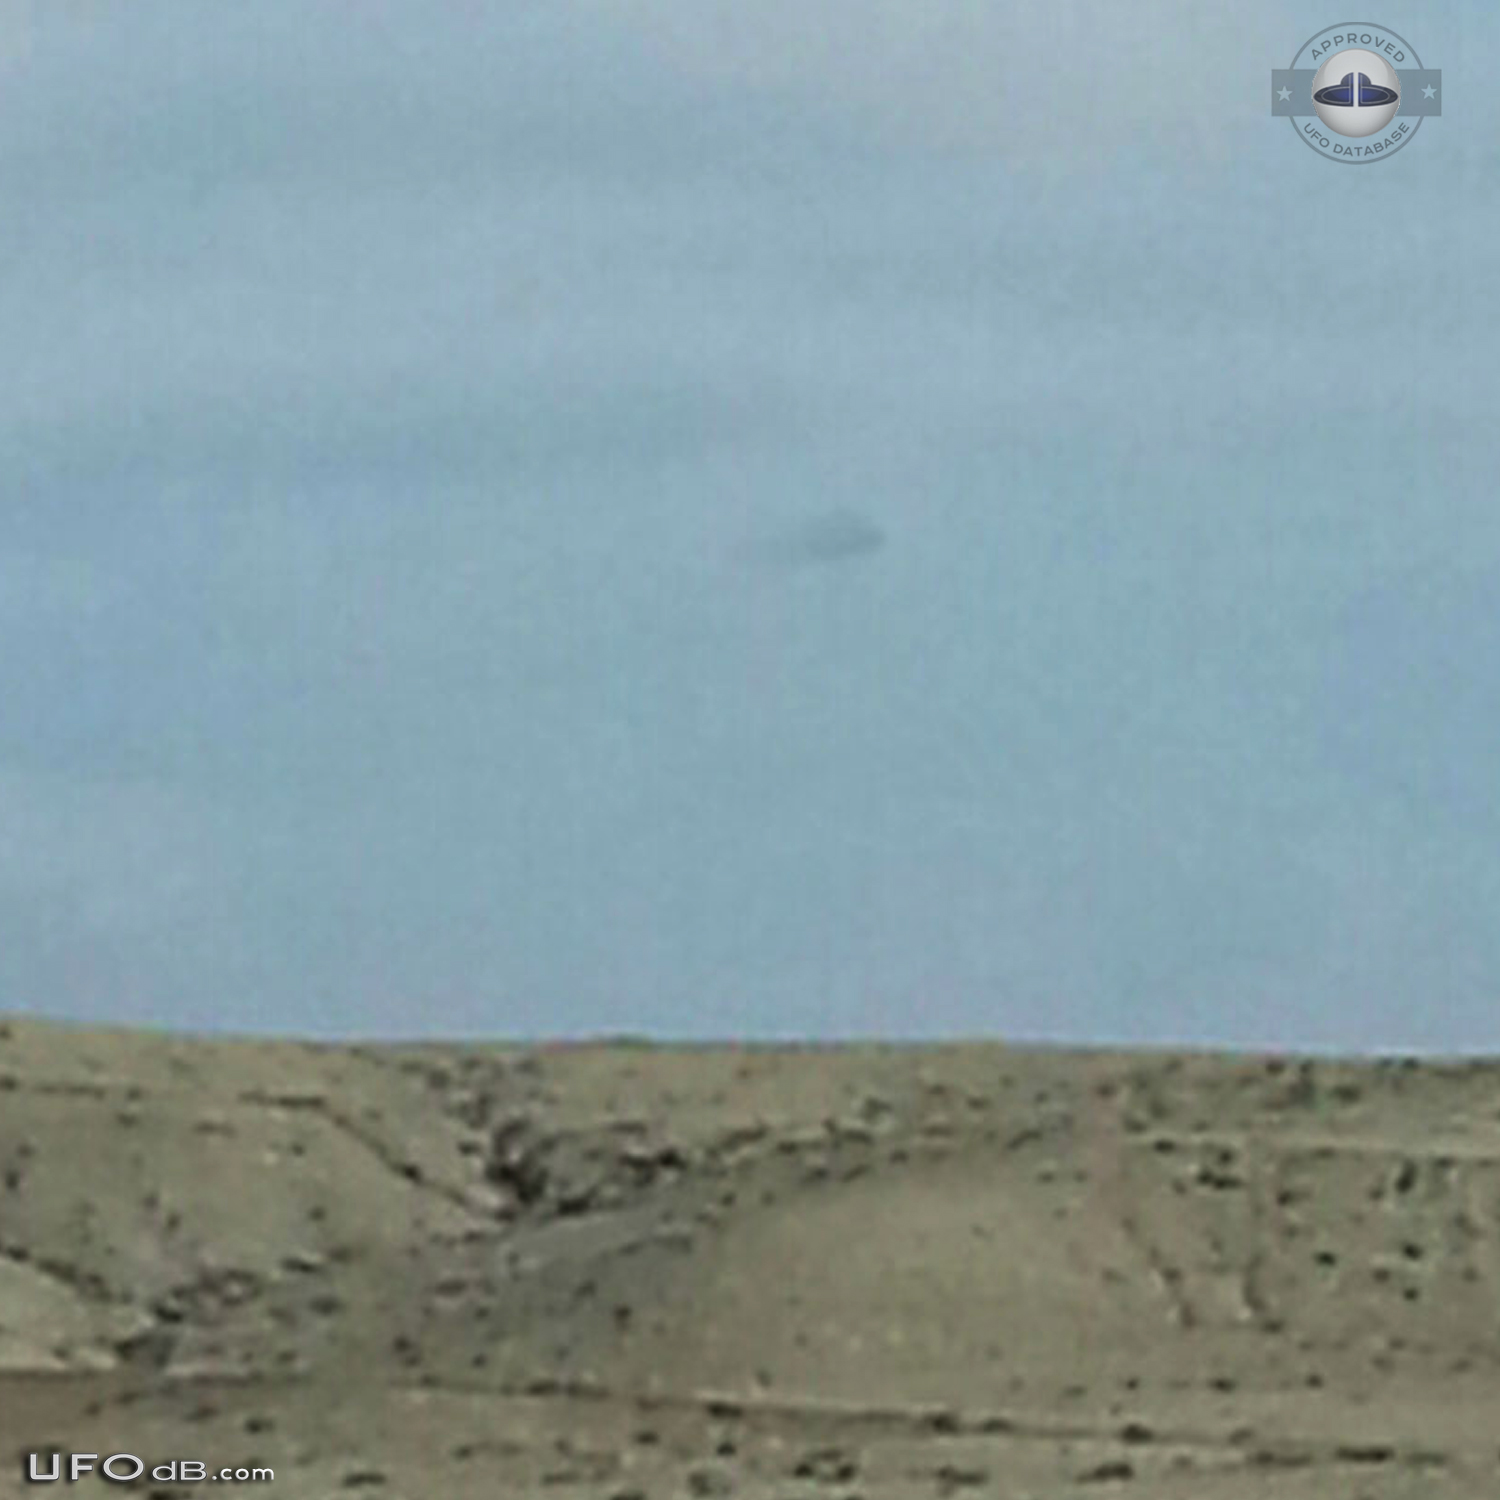 Cigar shaped UFO hiding in out of clouds in Farmington New Mexico USA UFO Picture #625-2